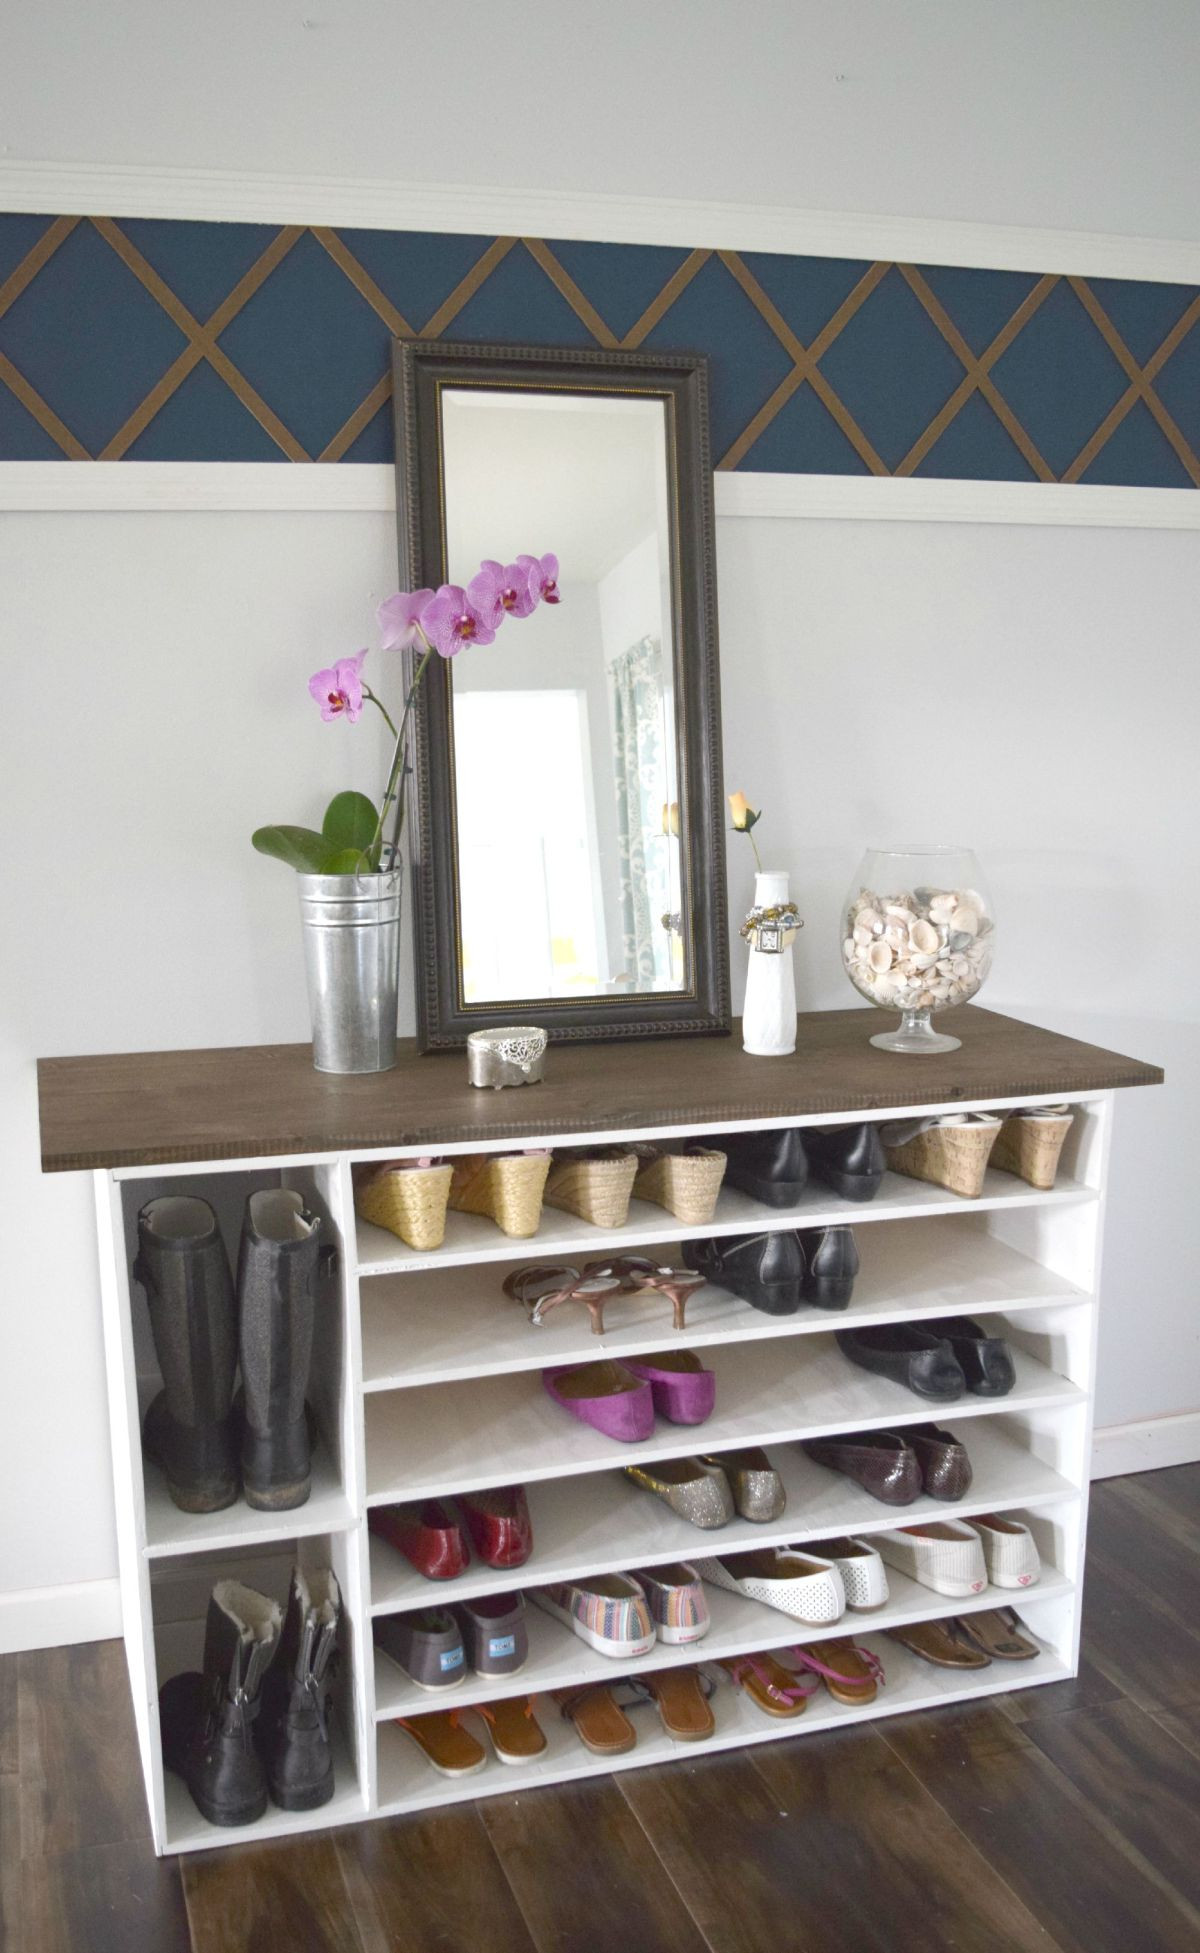 DIY Shoe Organizer For Small Closet
 Stylish DIY Shoe Rack Perfect for Any Room